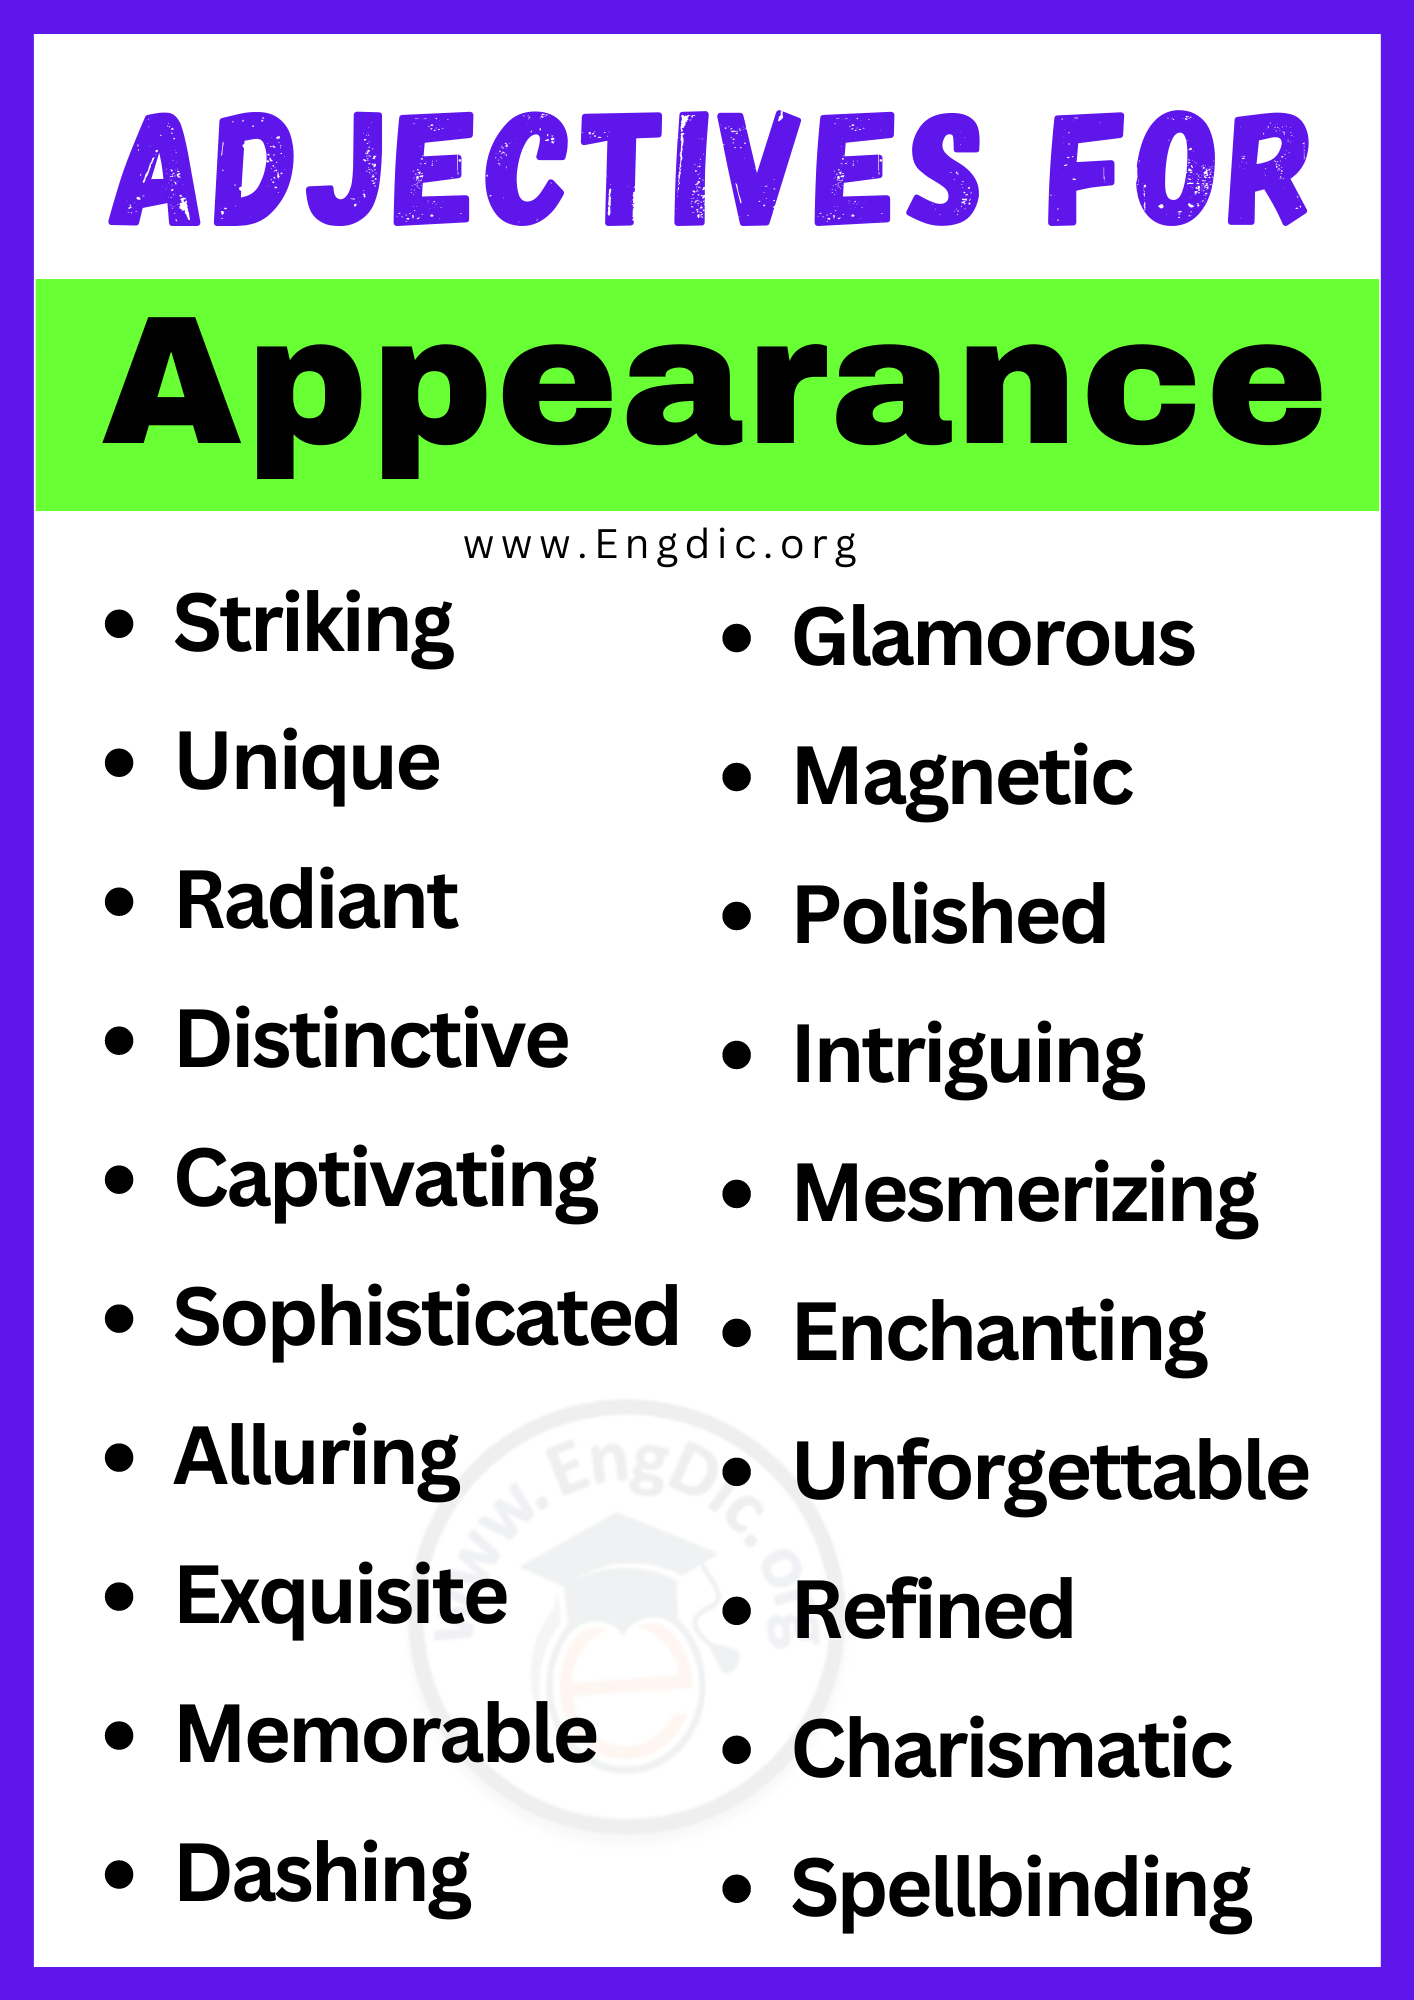 Adjectives for Appearance